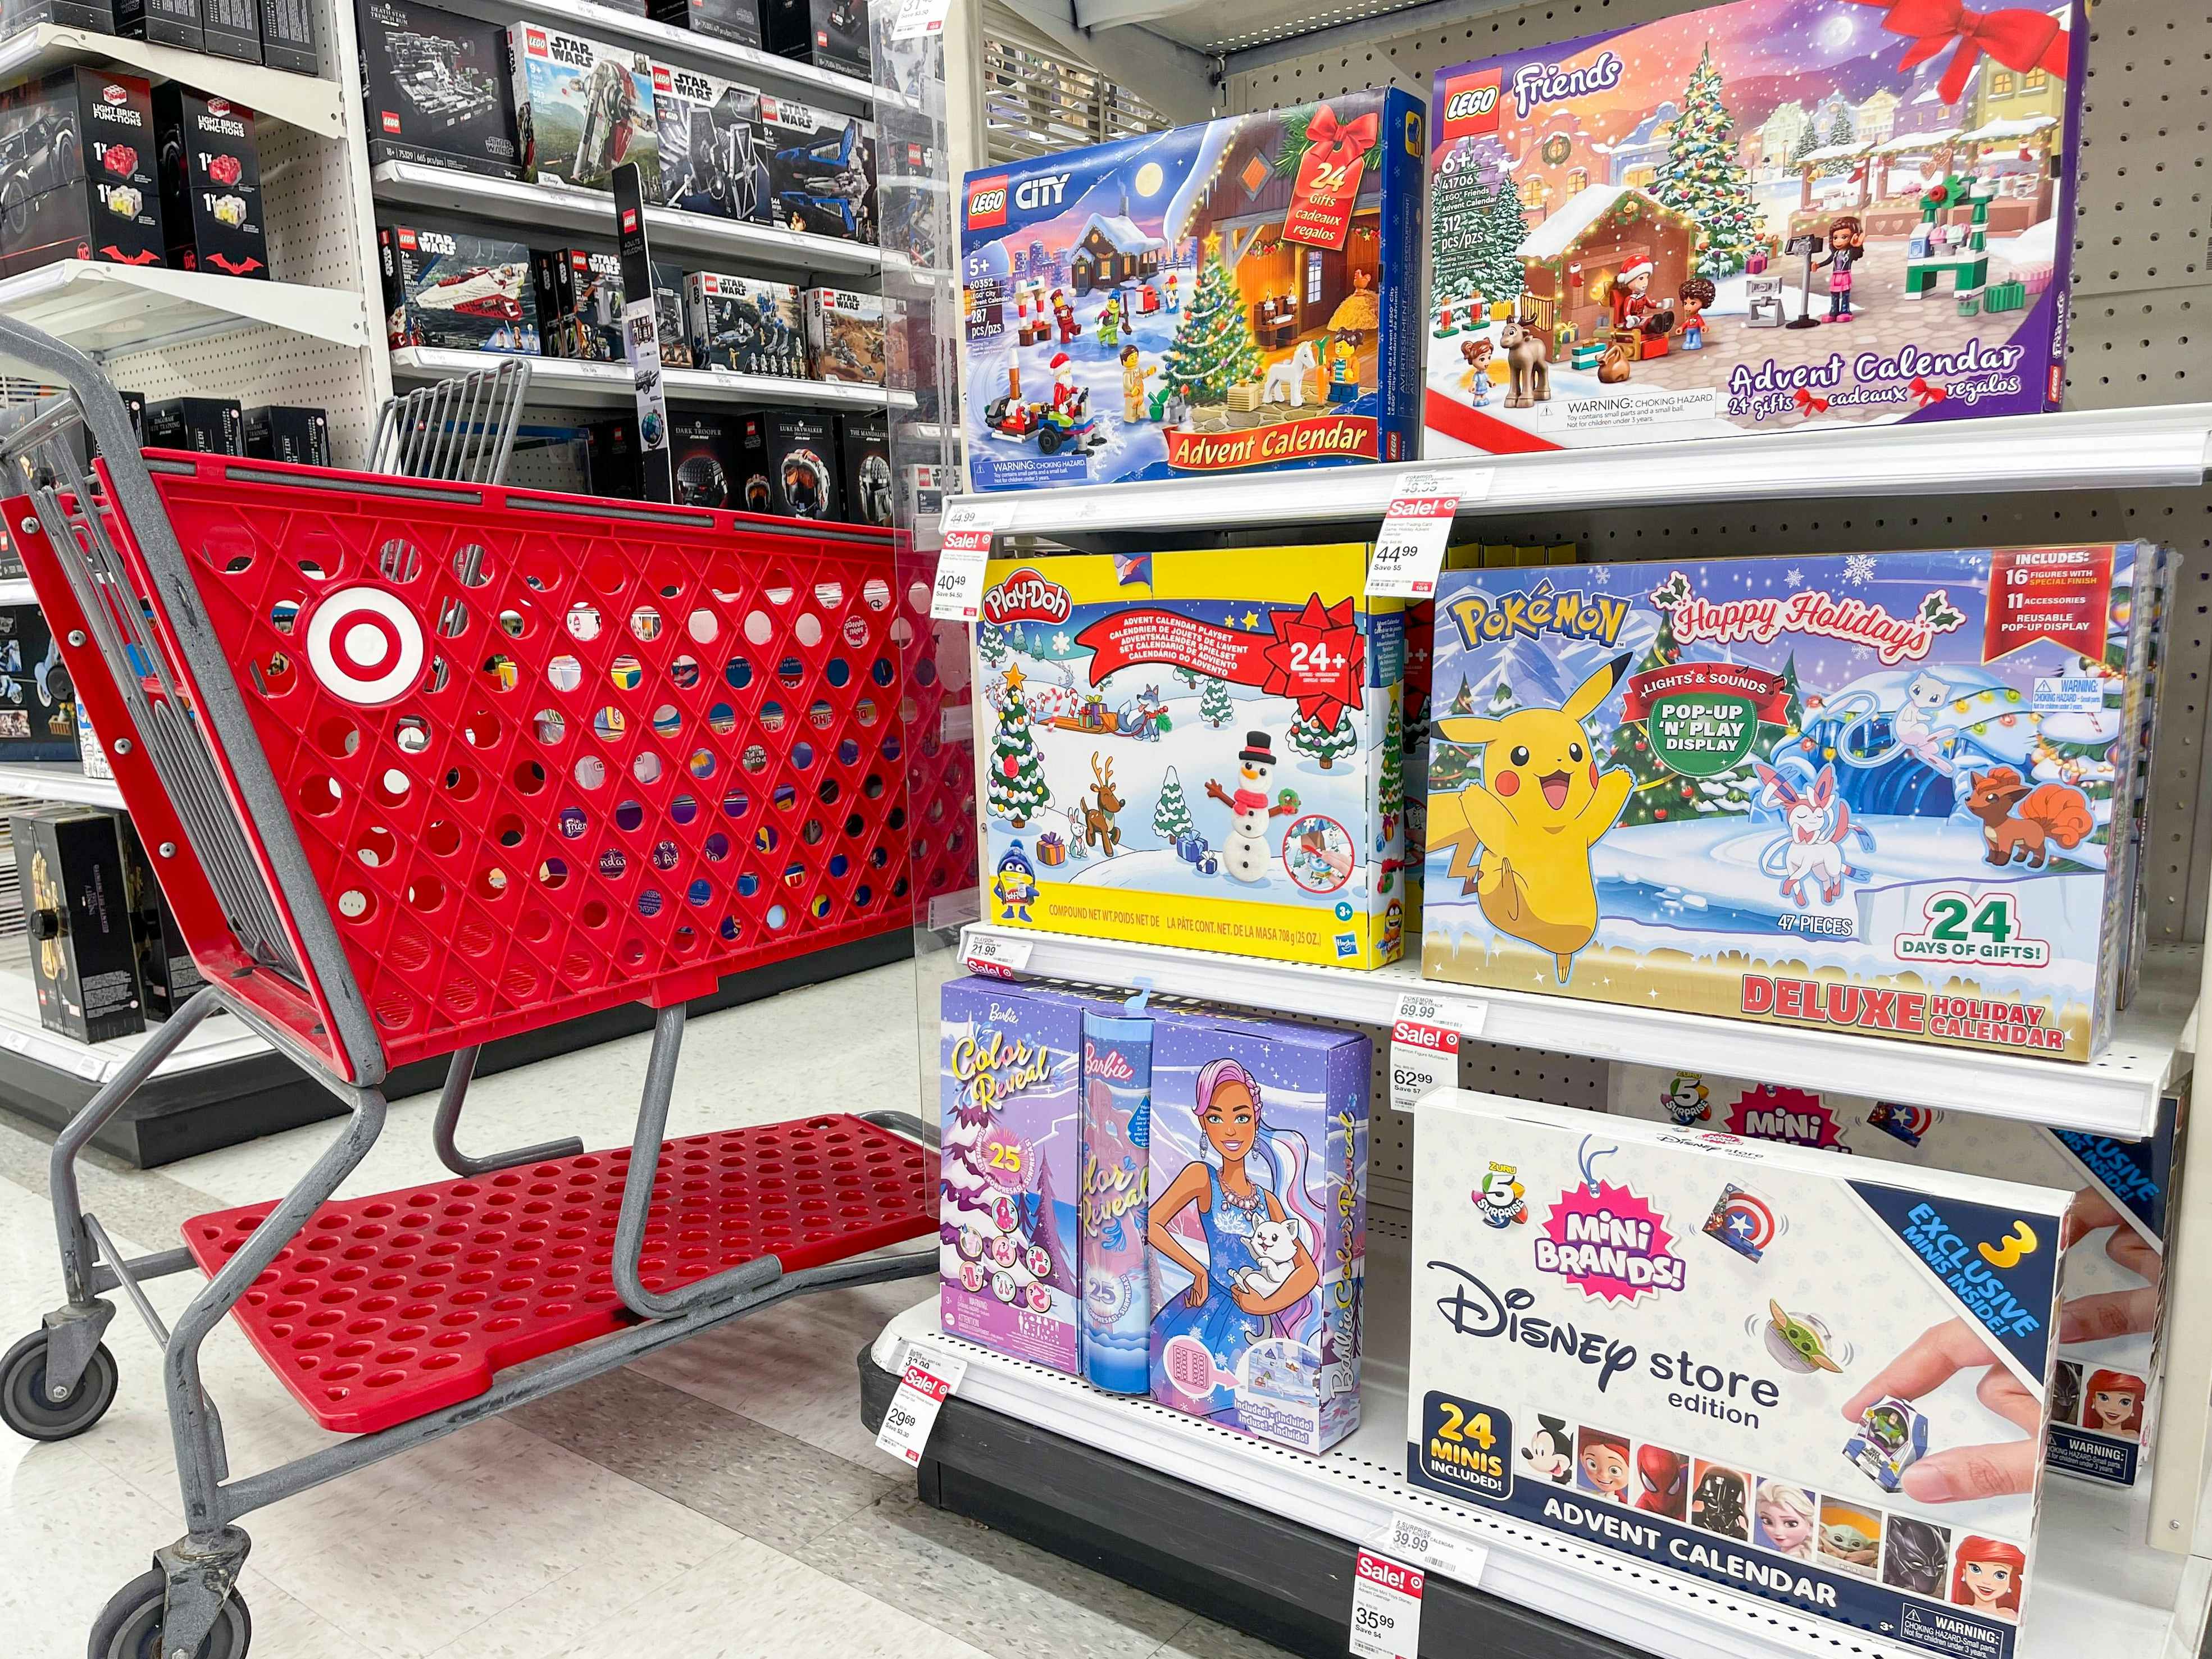 A Target shopping cart parked next to a display of holiday advent calendars at Target.